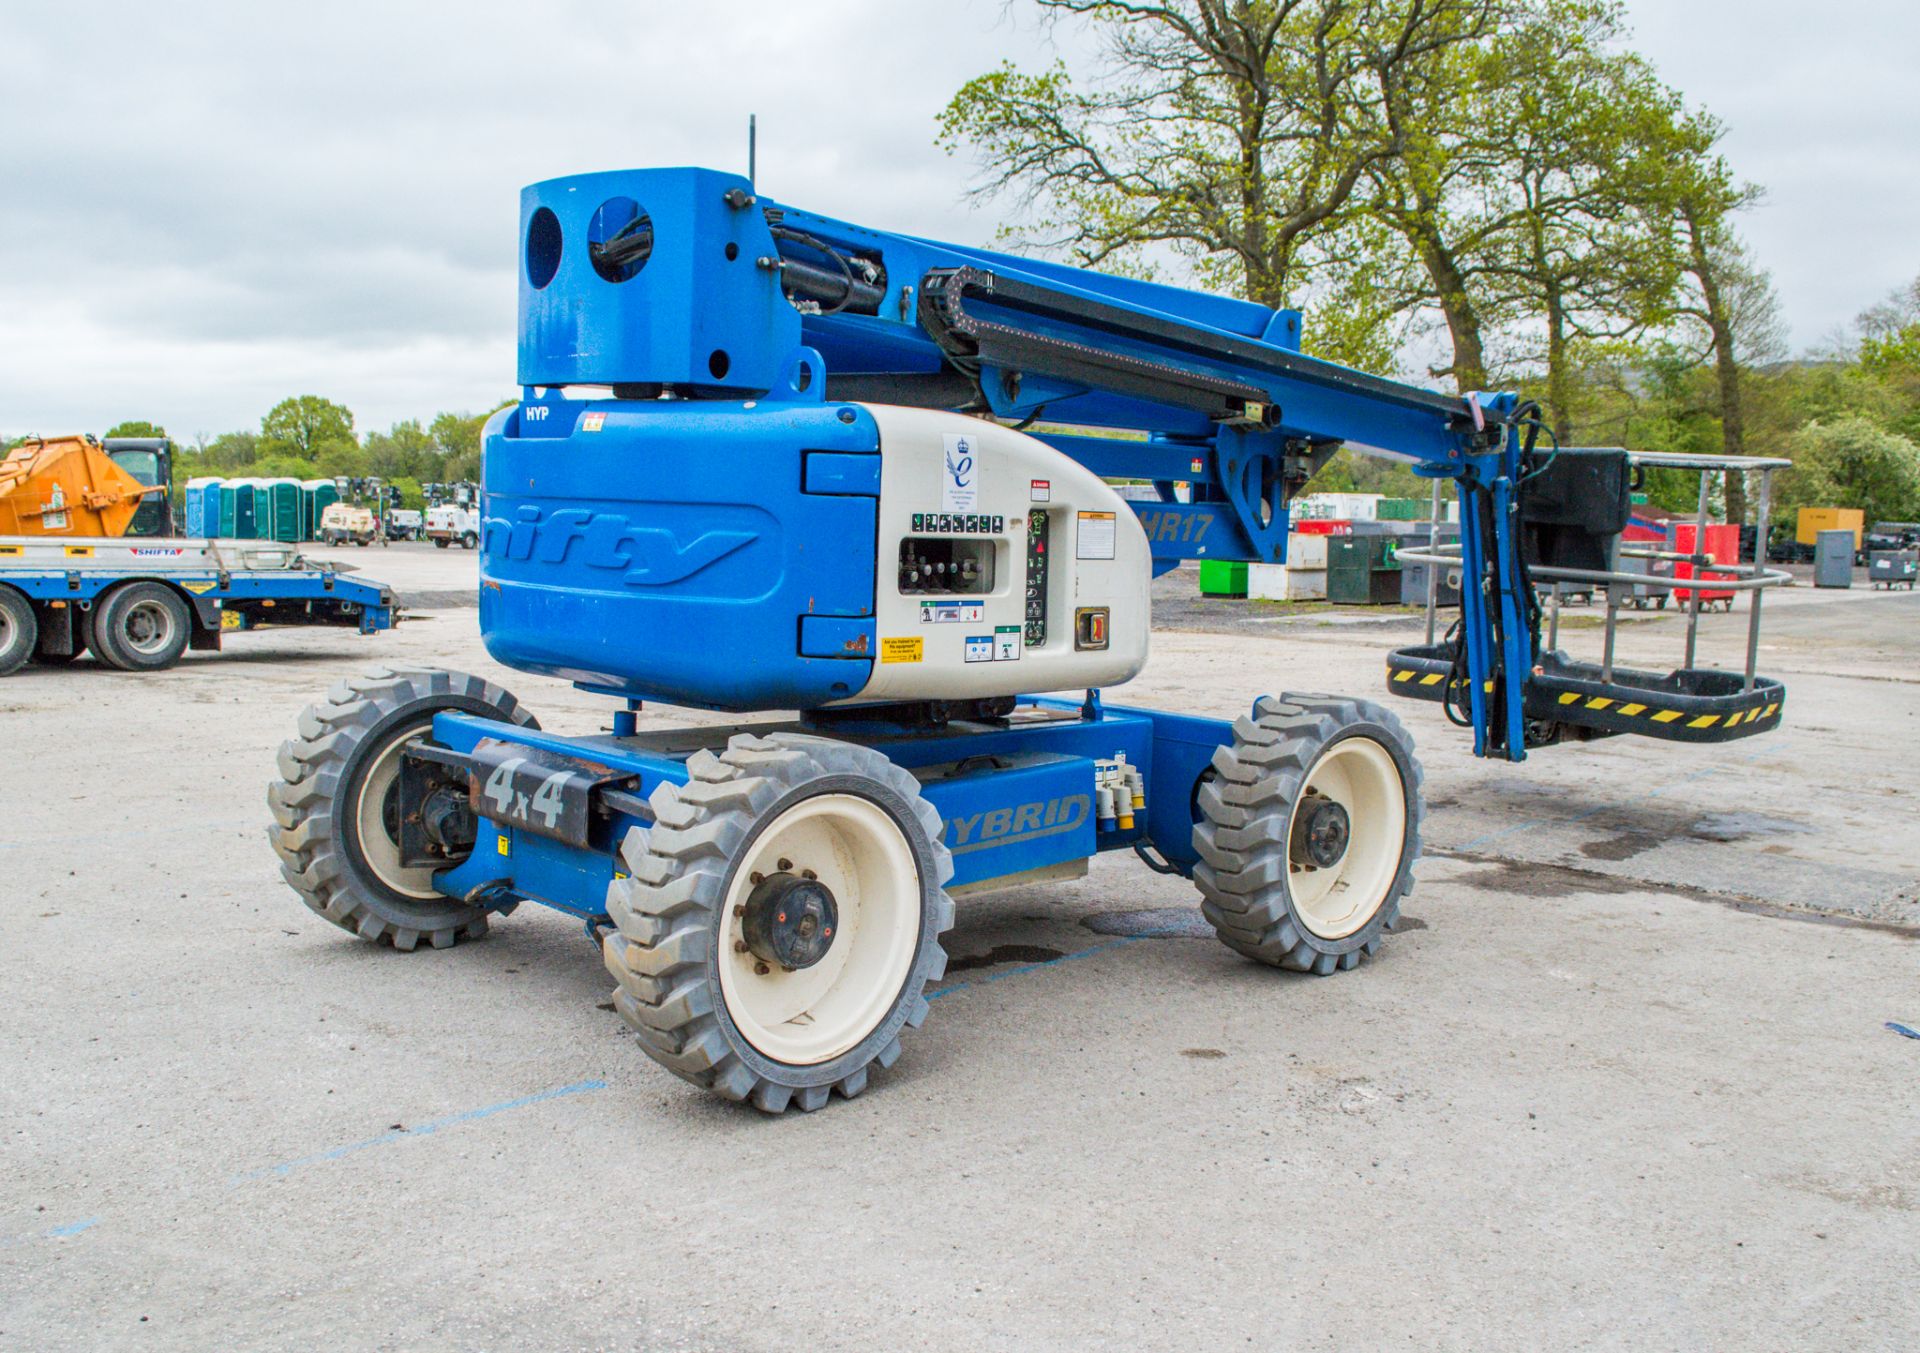 Nifty HR17 Hybrid battery electric/diesel driven articulated boom lift access platform Year: 2014 - Image 4 of 18